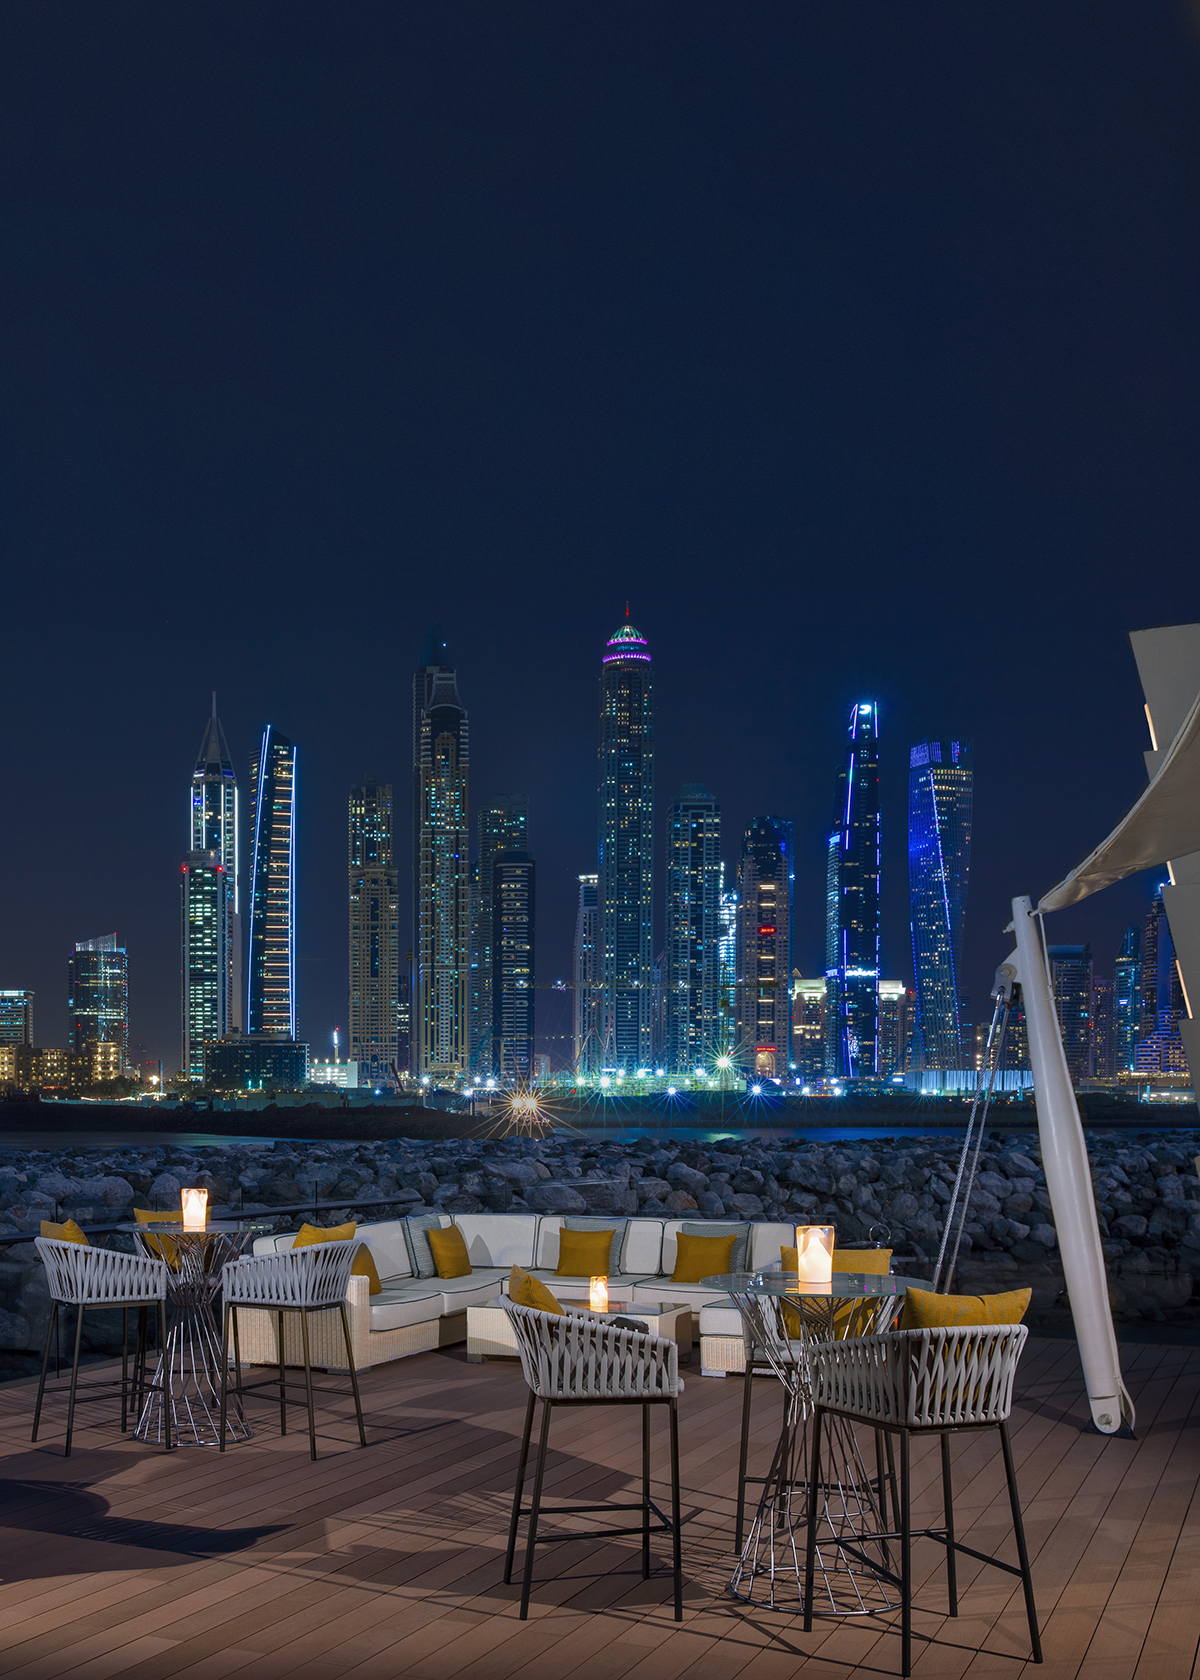 A restaurant with a view of a skyline in Dubai at night with buildings lit up